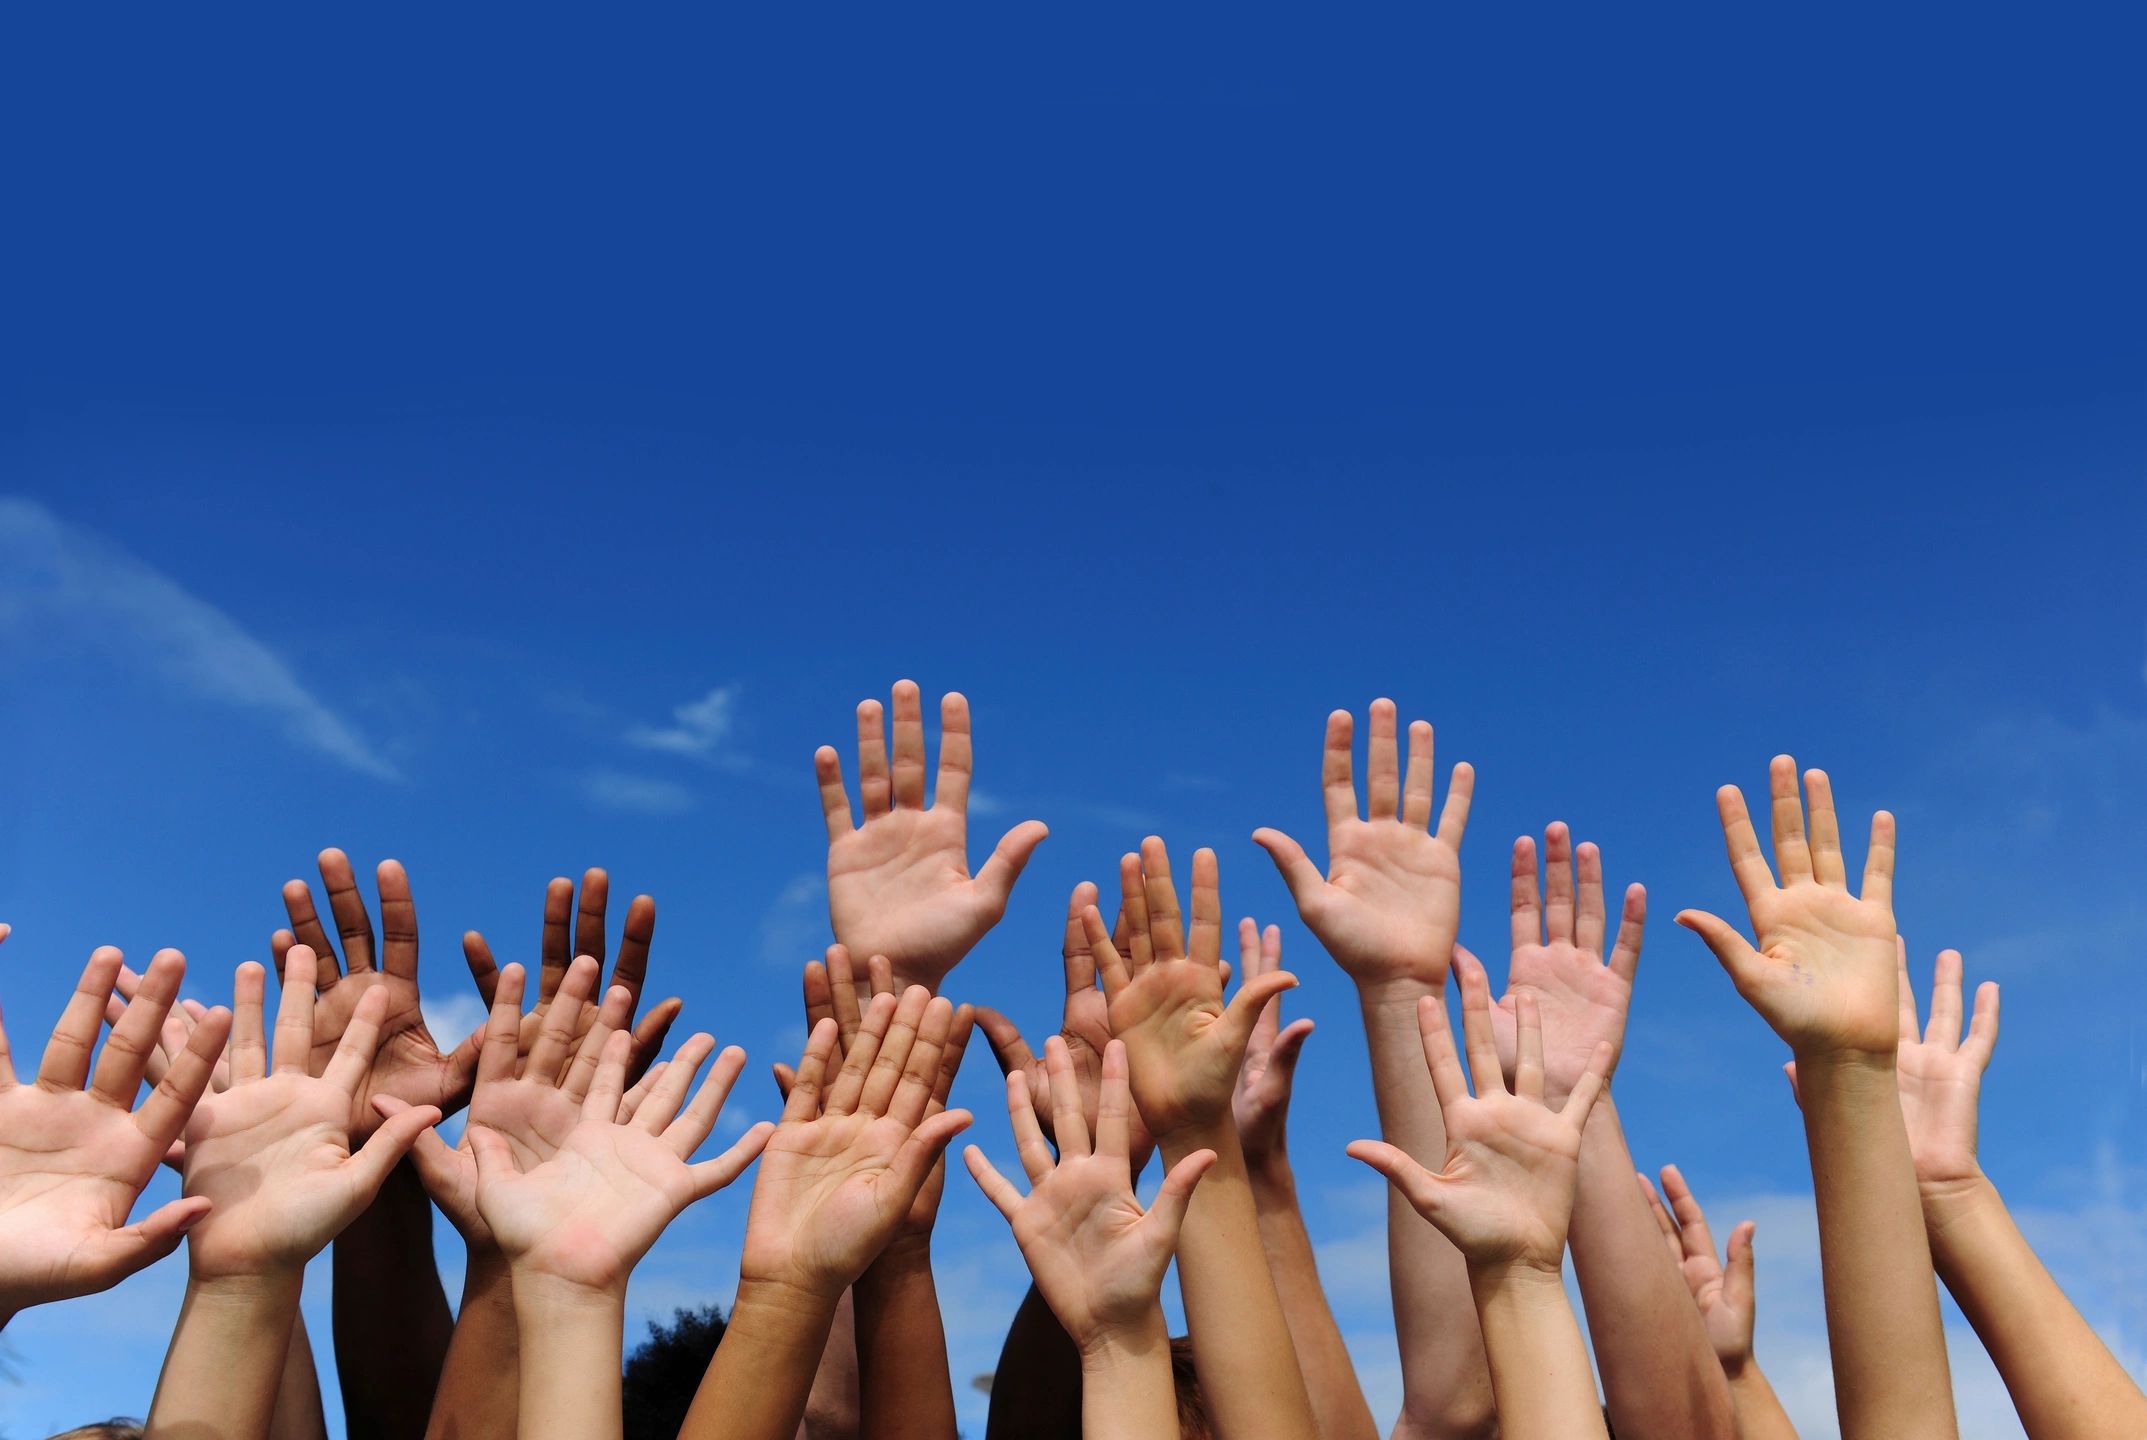 Hands of all shapes and skin tones reaching up to a blue clear sky. 